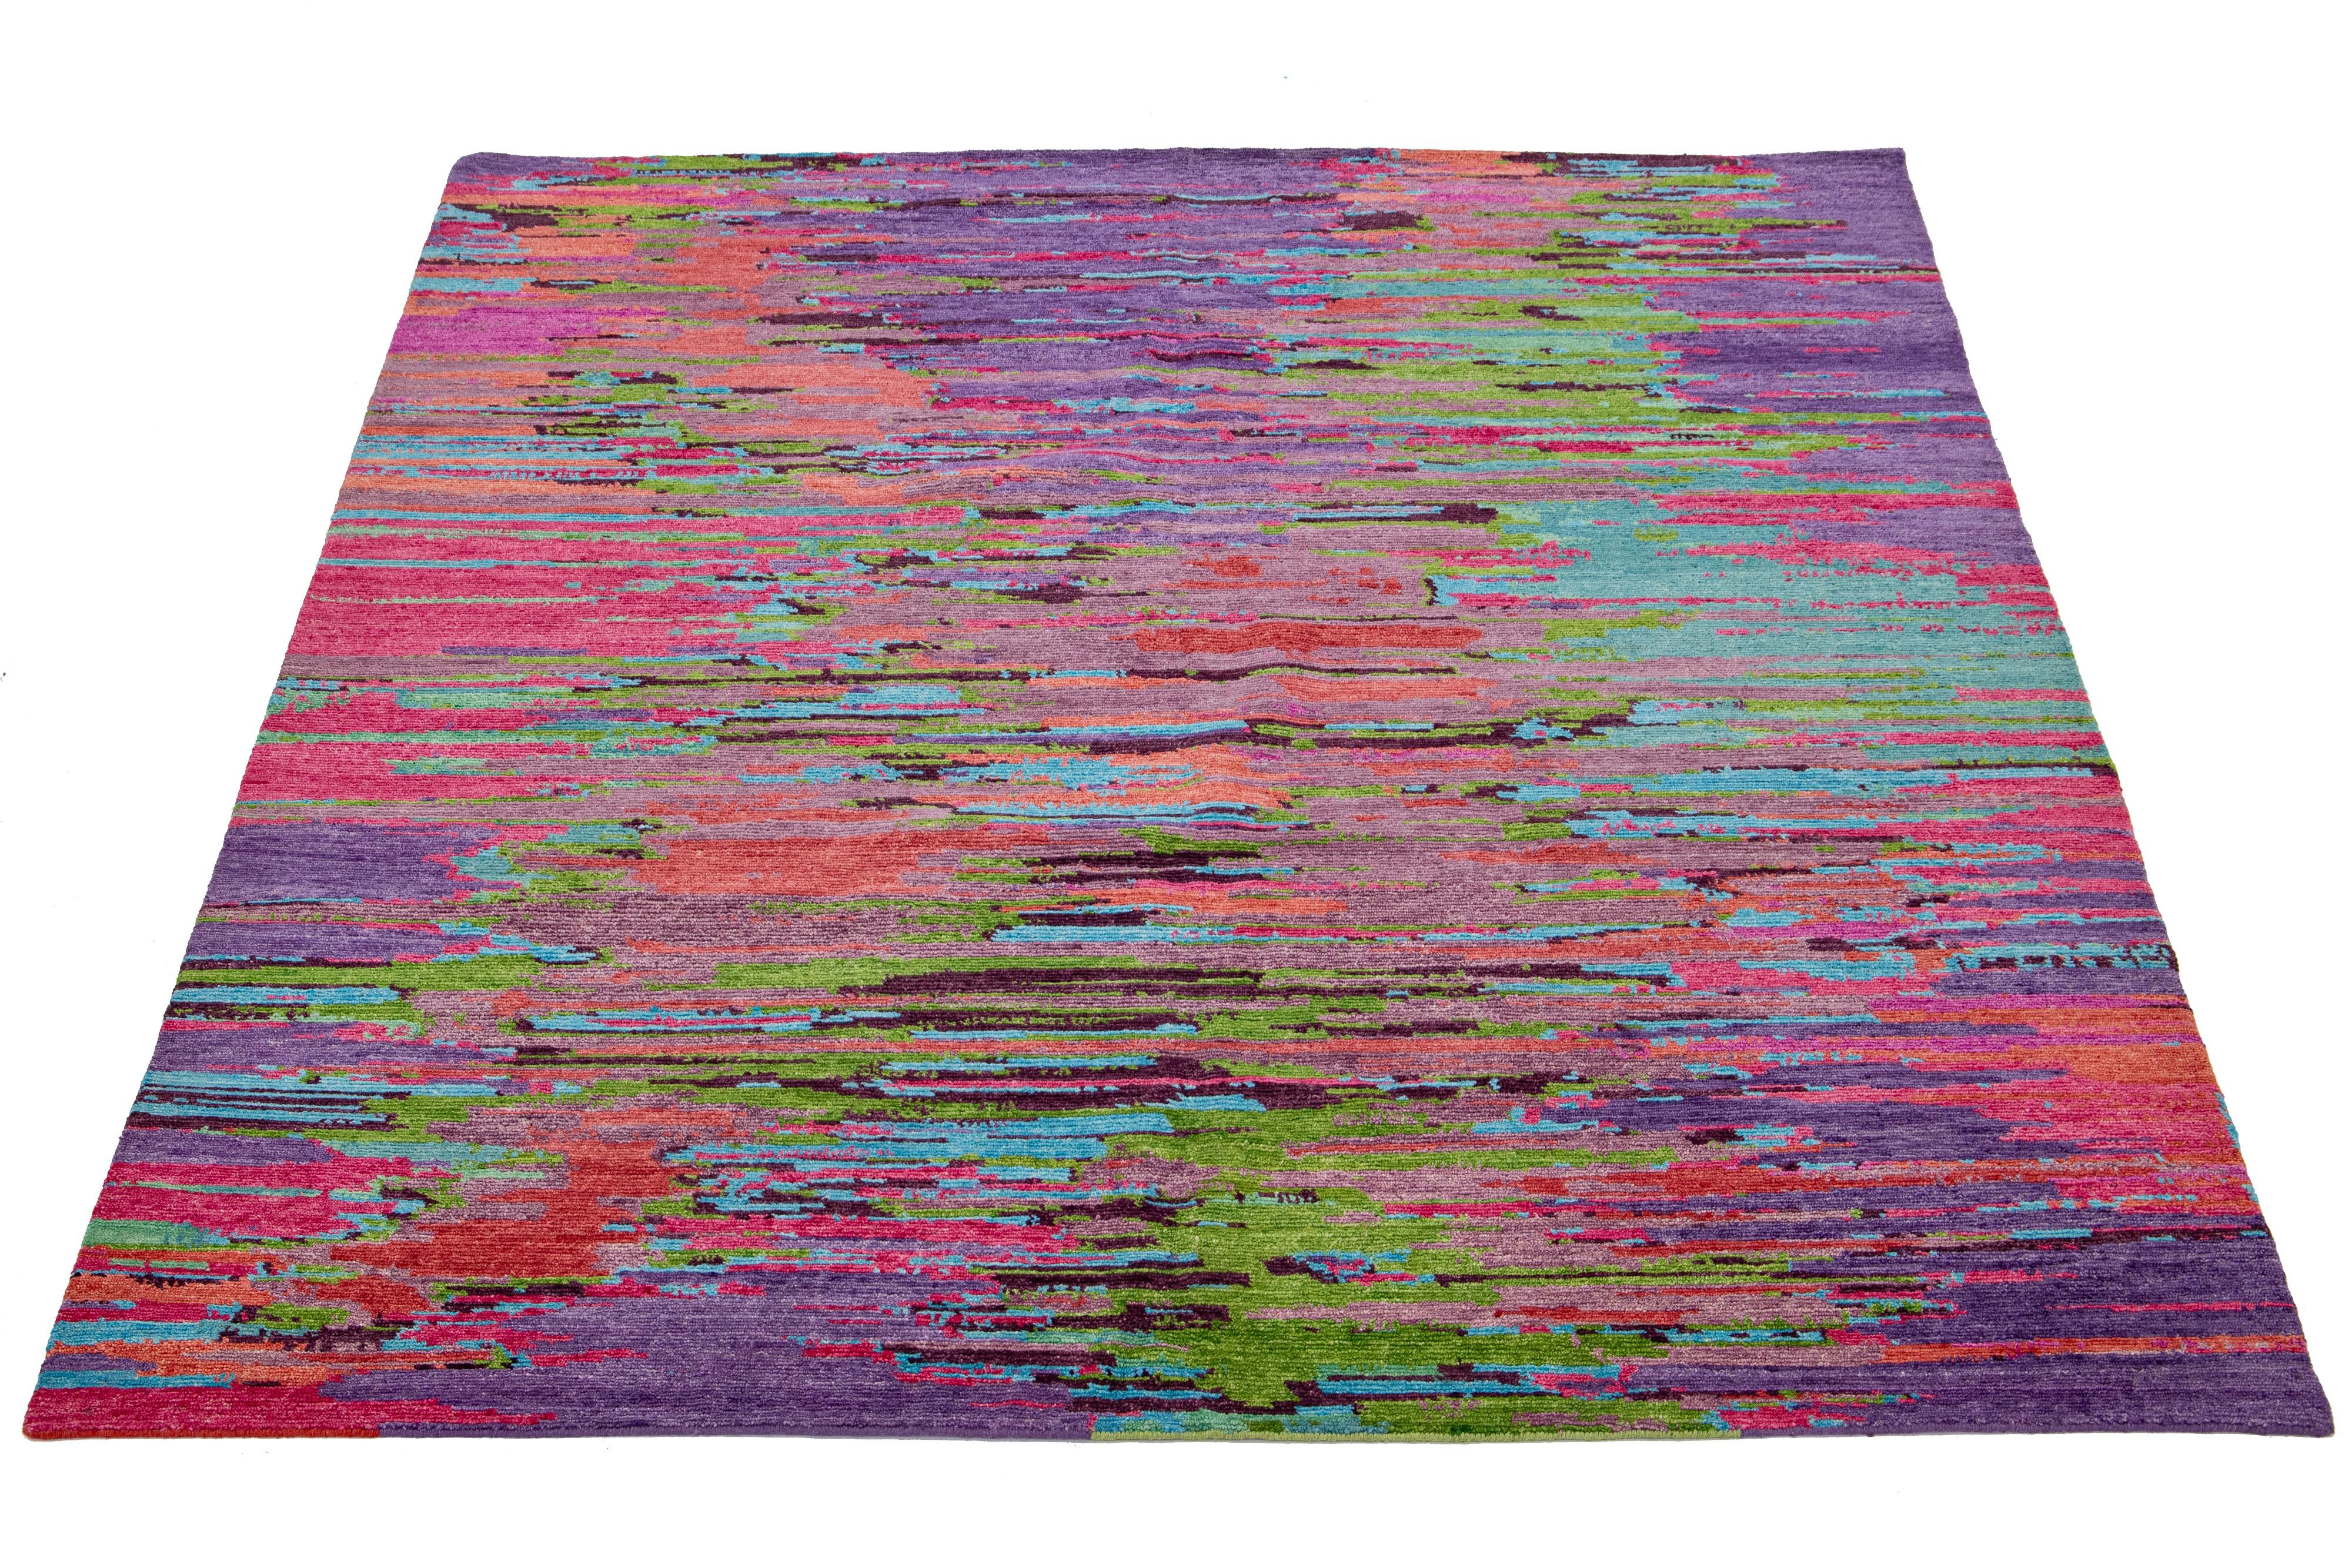 This beautiful, modern-textured hand-knotted wool rug features a multicolor color field of purple, pink, green, and blue. The rug also boasts a stunning textured abstract design.

This rug measures 8' x 10'.

Our rugs are professionally cleaned